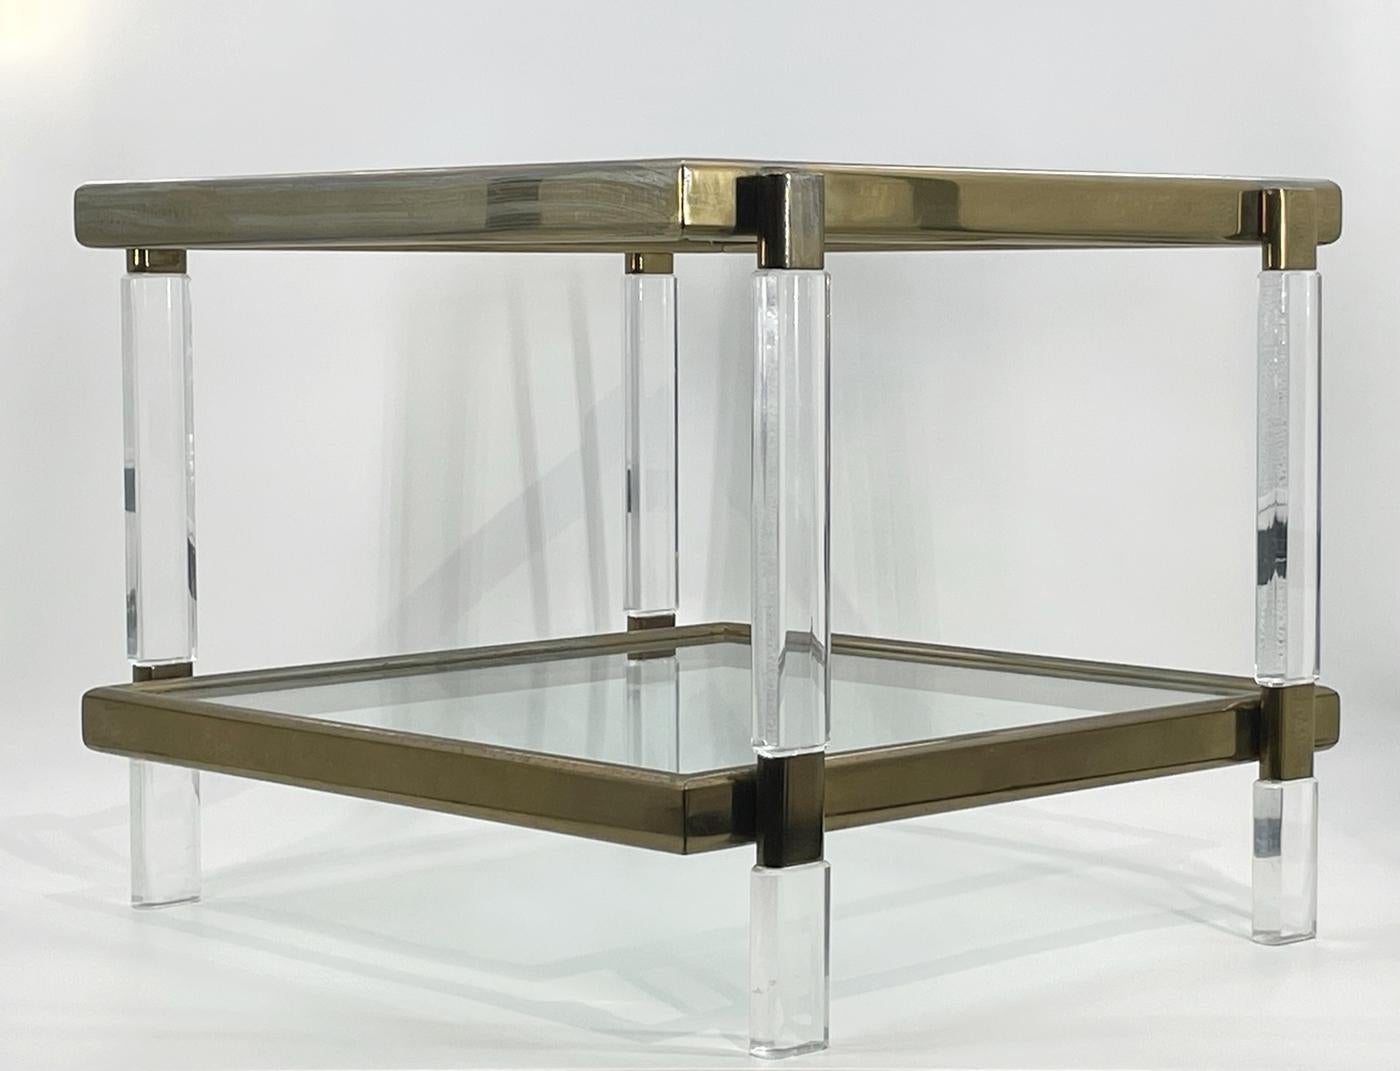 Our Lucite, Brass & Glass 2 Tier Table by Charles Hollis Jones, a stunning addition to any home or office space. This exquisite piece of furniture features a sleek and modern design with a square shape and two shelves, providing ample space for